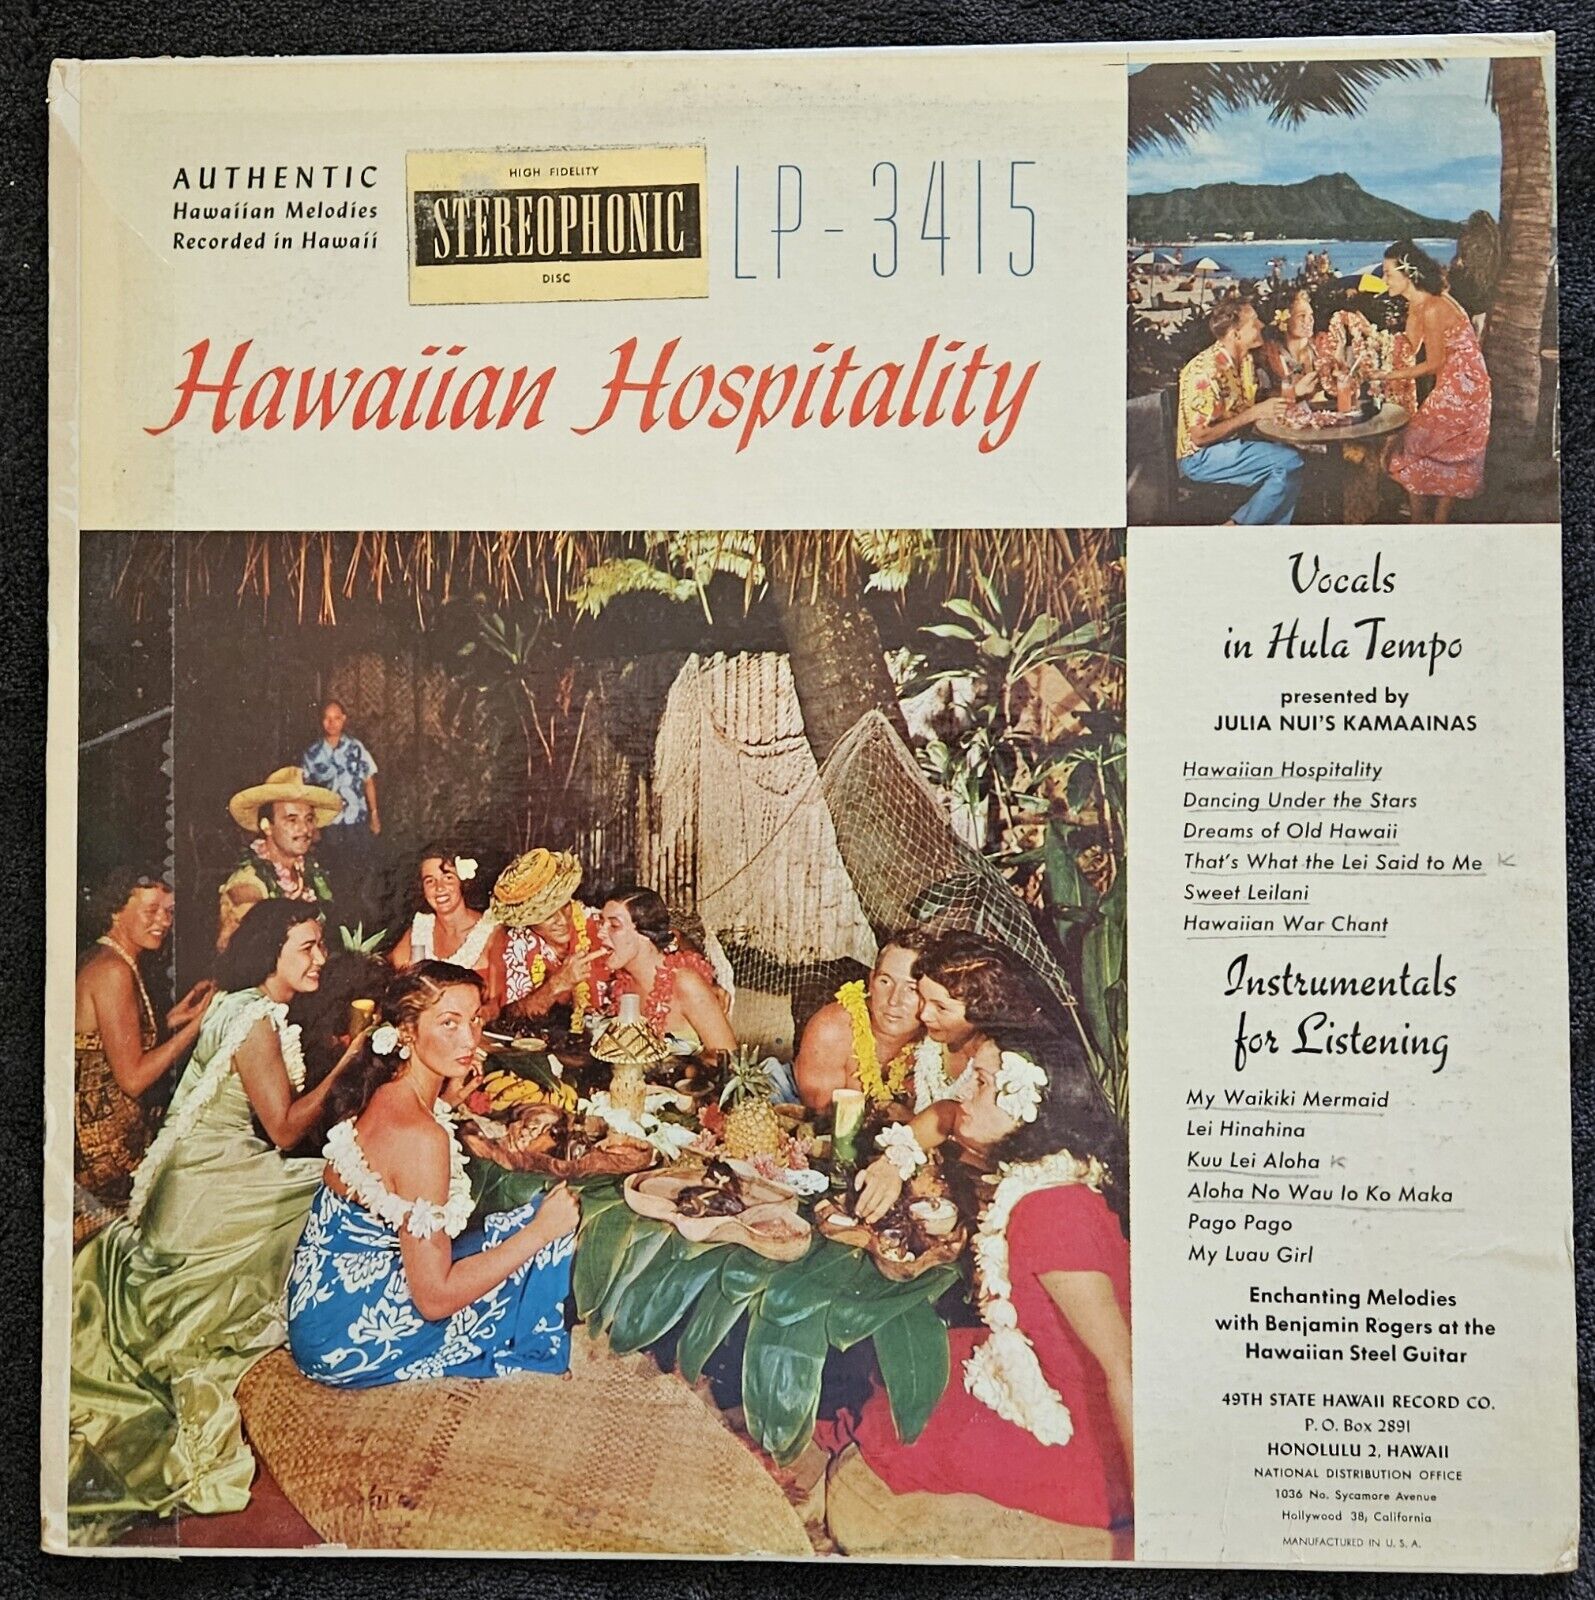 49th State Hawaii Record Co.  - LP-3415 - 1950\'s - STEREO - Vinyl - LP